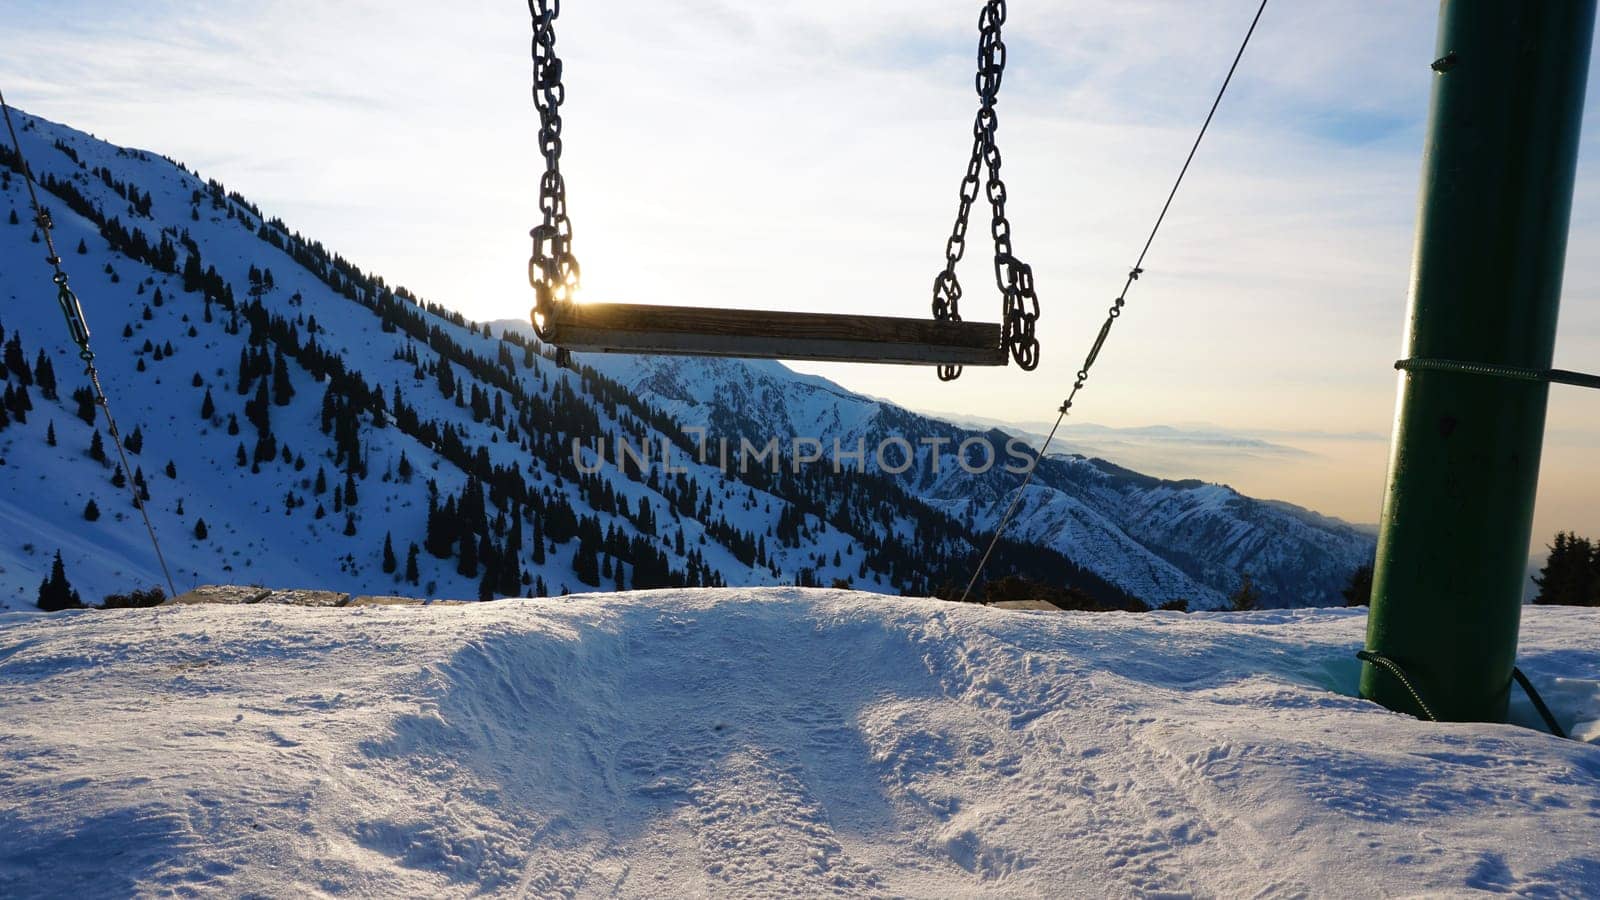 Swing in winter mountains with sunset view by Passcal